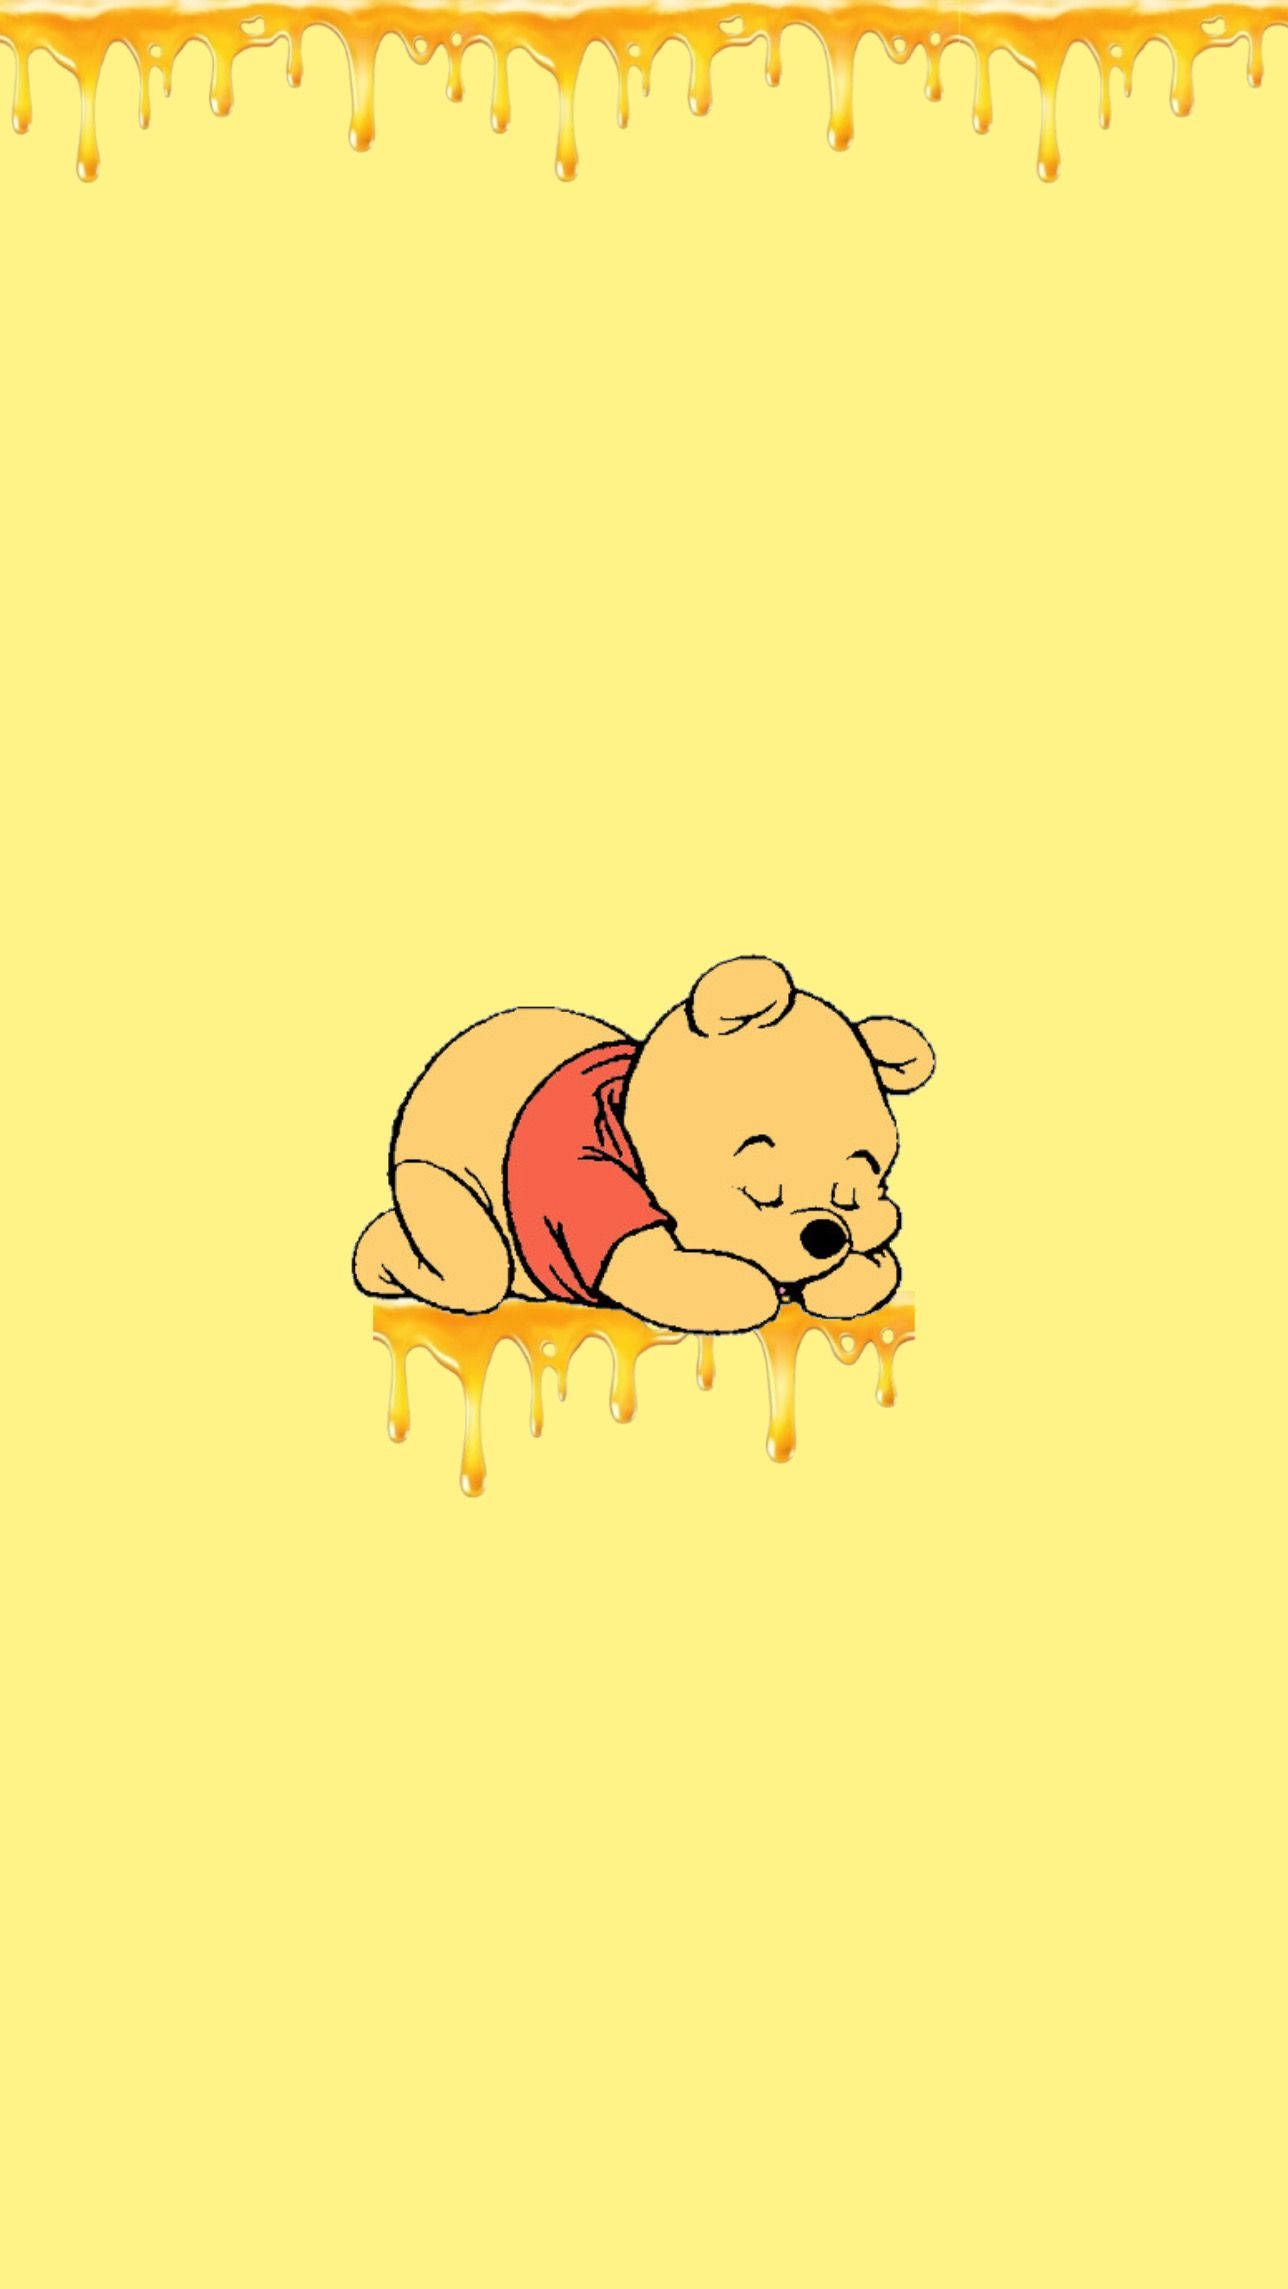 Winnie the pooh sleeping on a yellow background - Honey